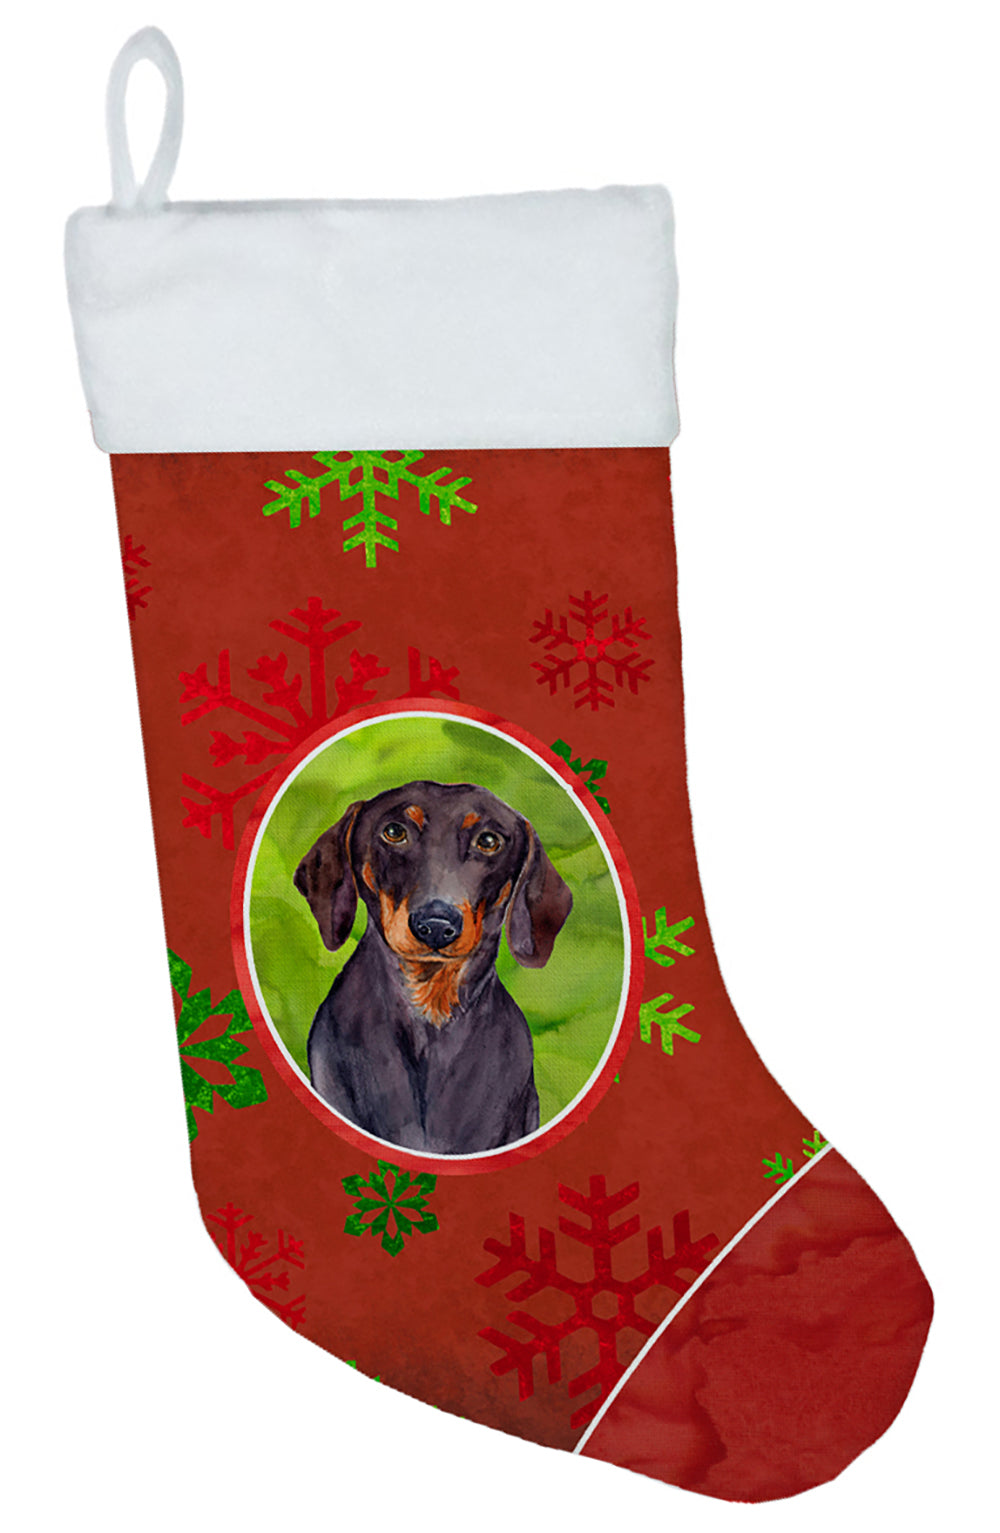 Dachshund Red and Green Snowflakes Holiday Christmas Christmas Stocking LH9313